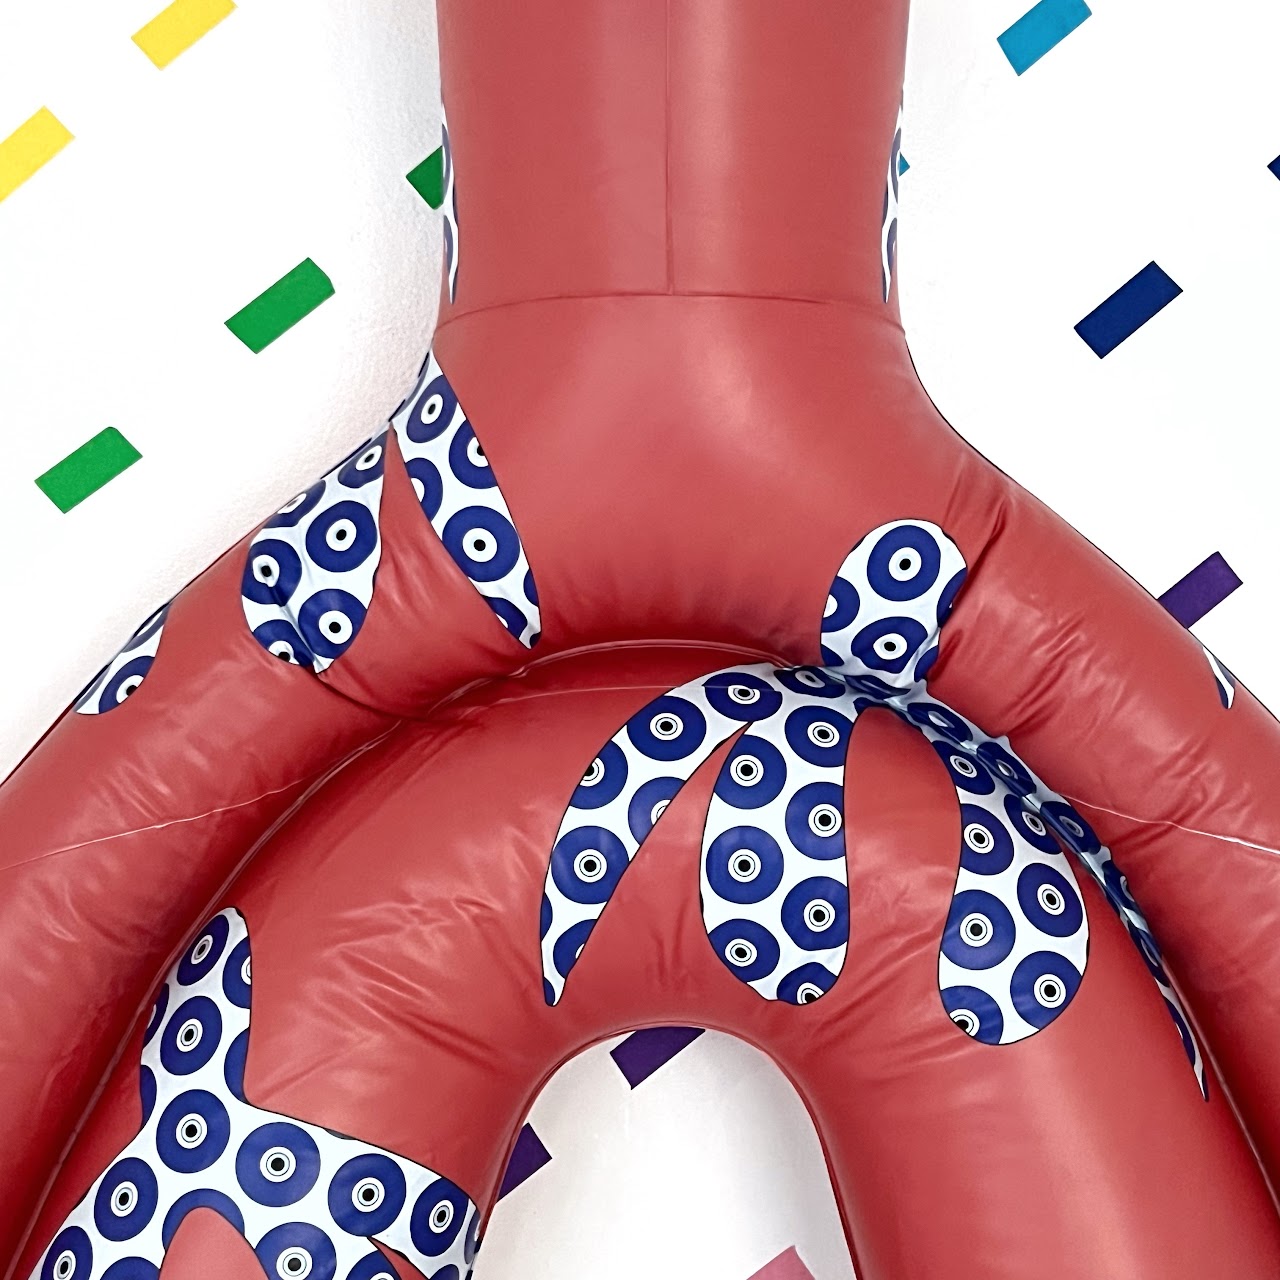 Sophia Wallace 'Evil Eye' Signed Inflatable Clitoris Sculpture #2